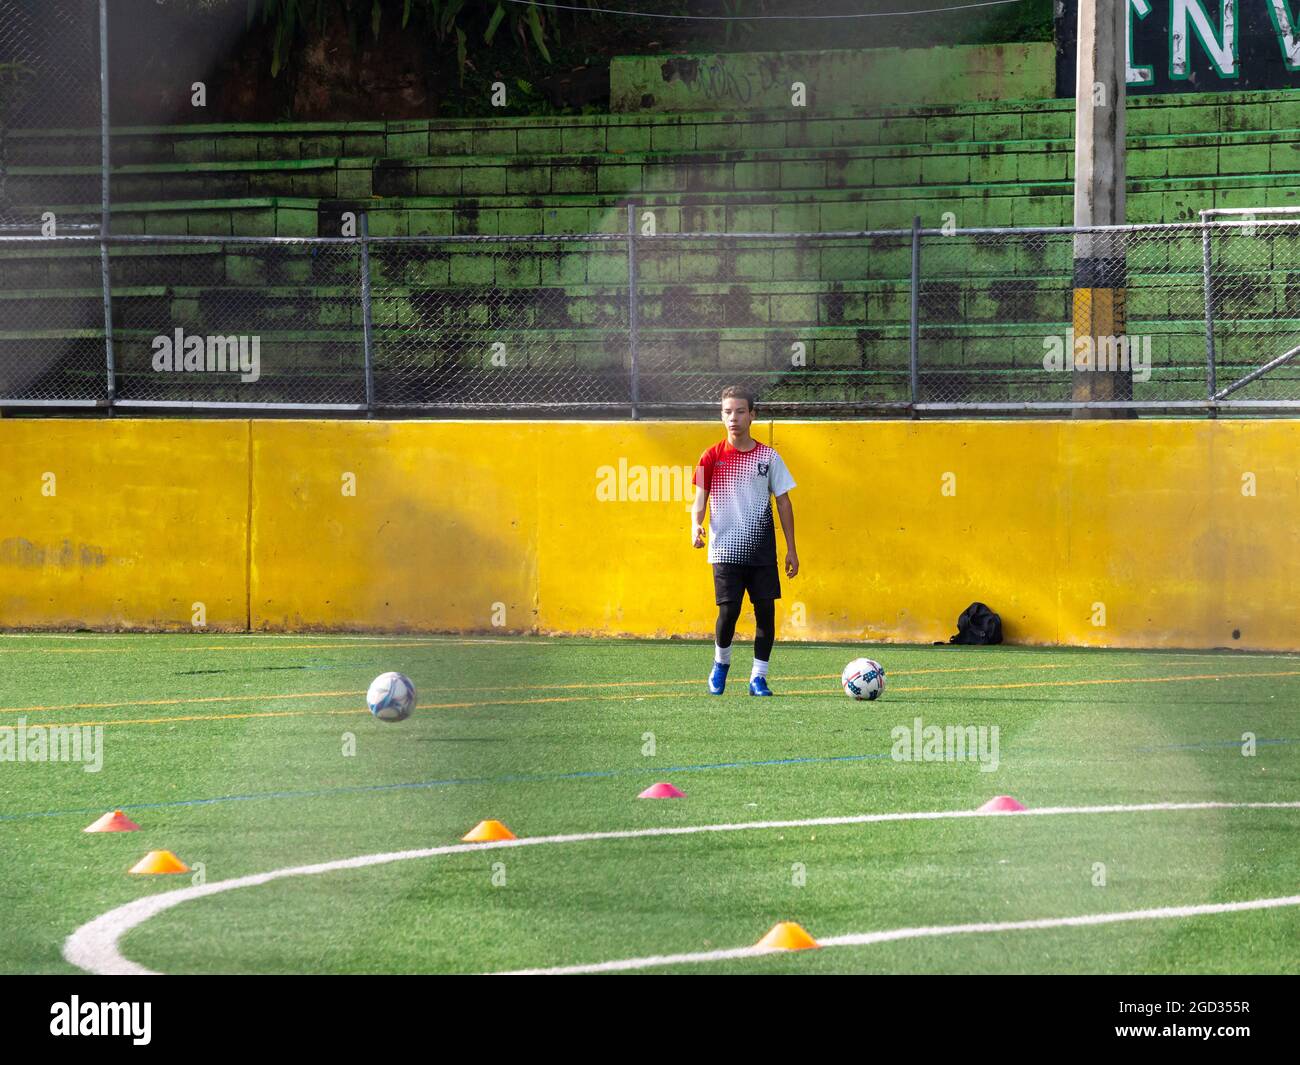 Medellin, Colombia - July 30 2021: Young Latin Teenager is Training with two Soccer Balls on a Green Synthetic Field in a Sunny Day Stock Photo